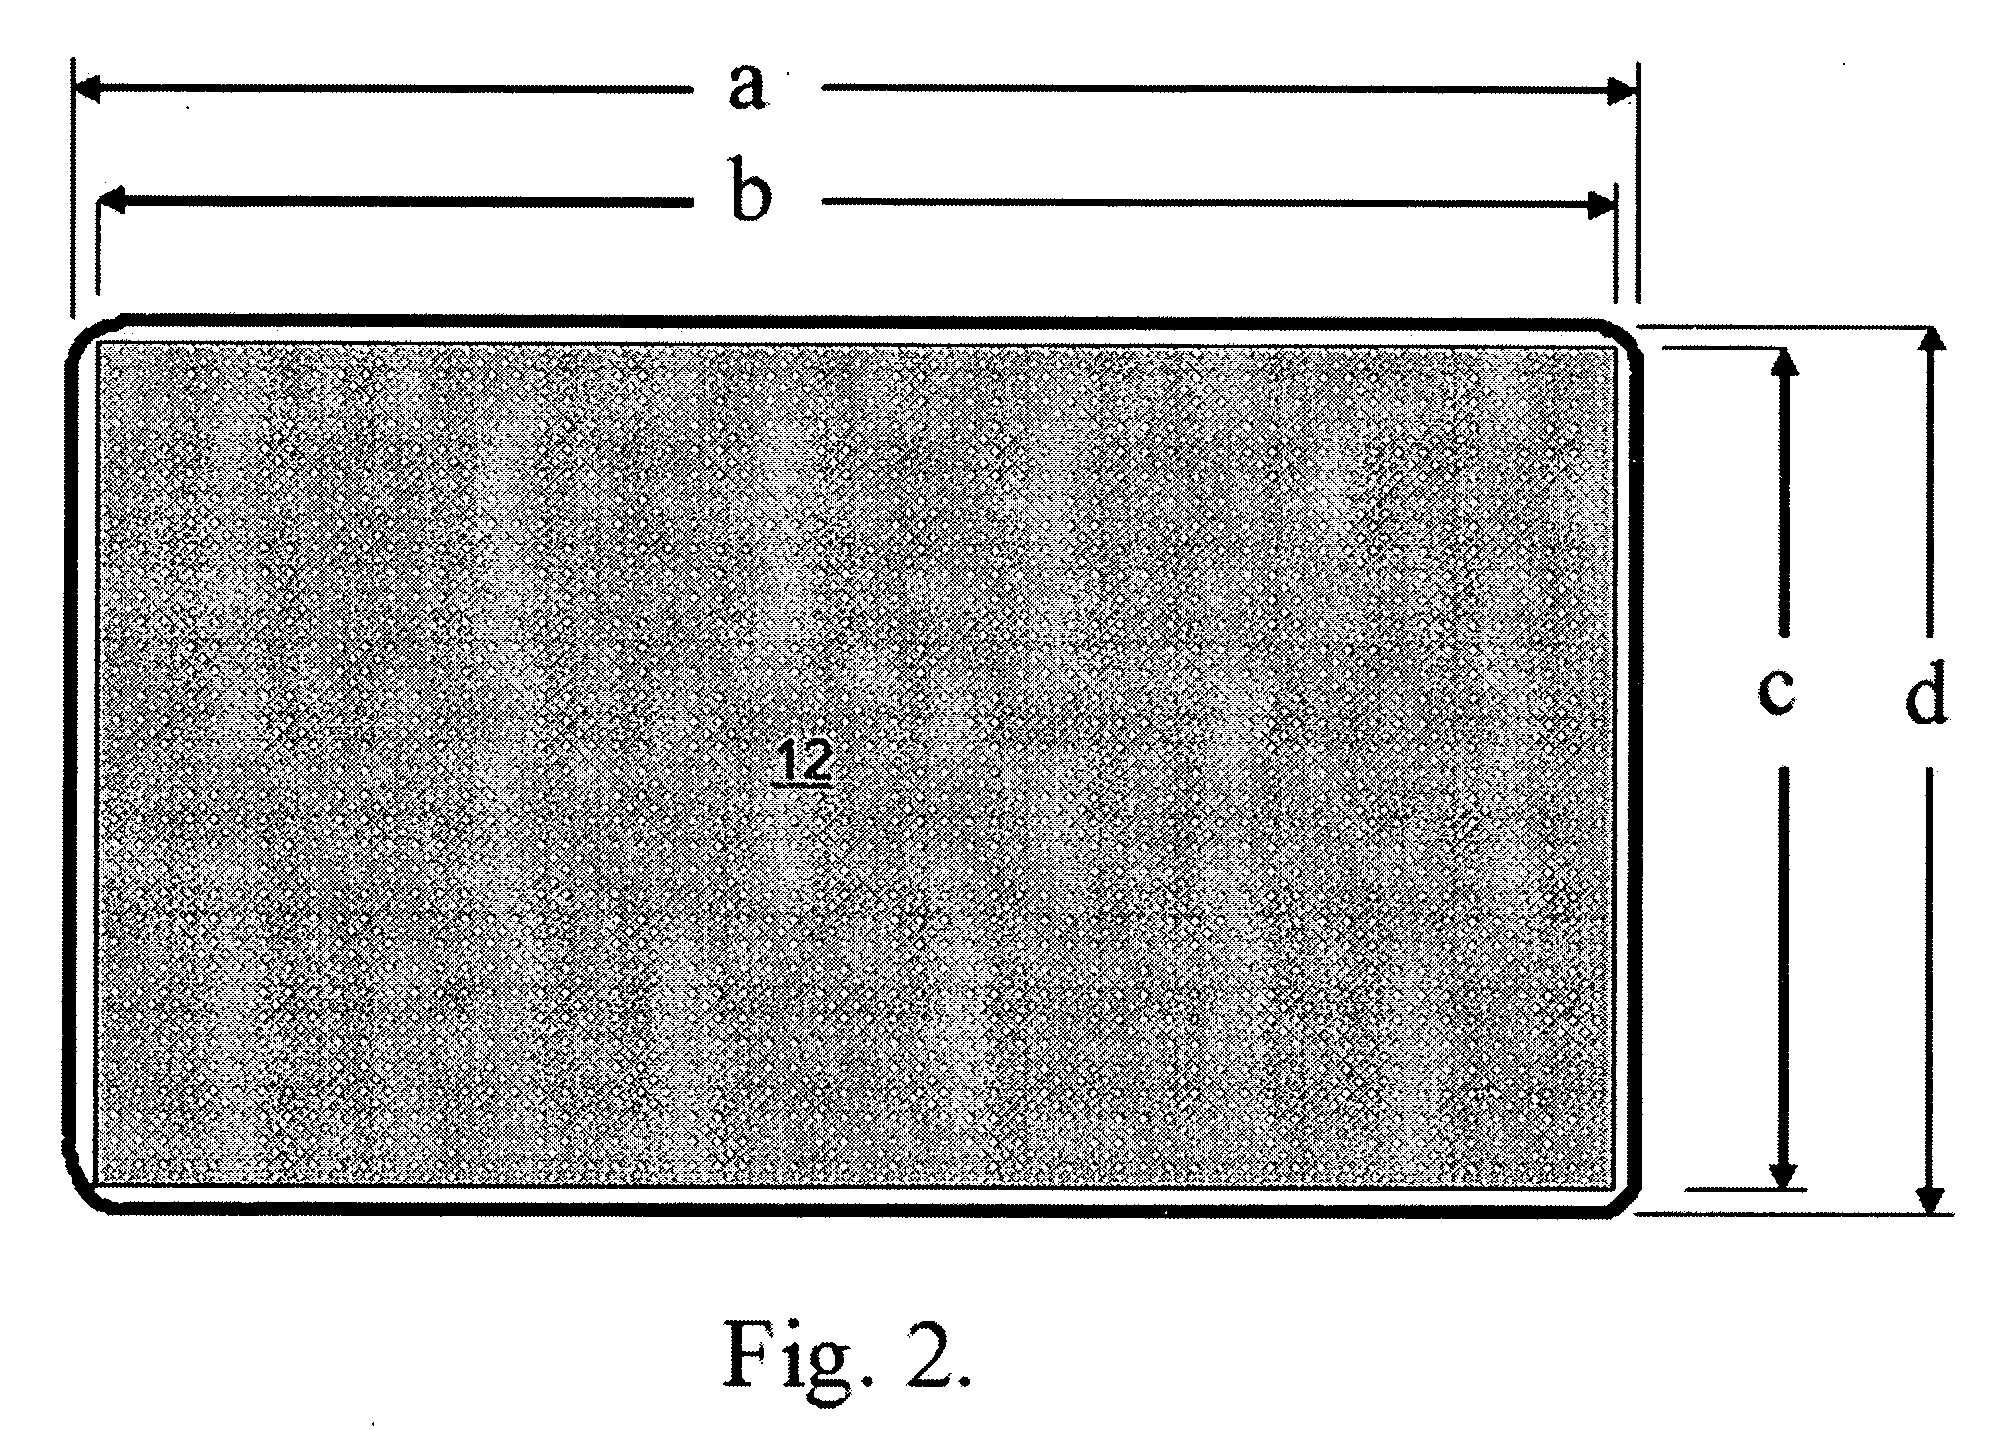 Method and apparatus for interfacing separations techniques to MALDI-TOF mass spectrometry